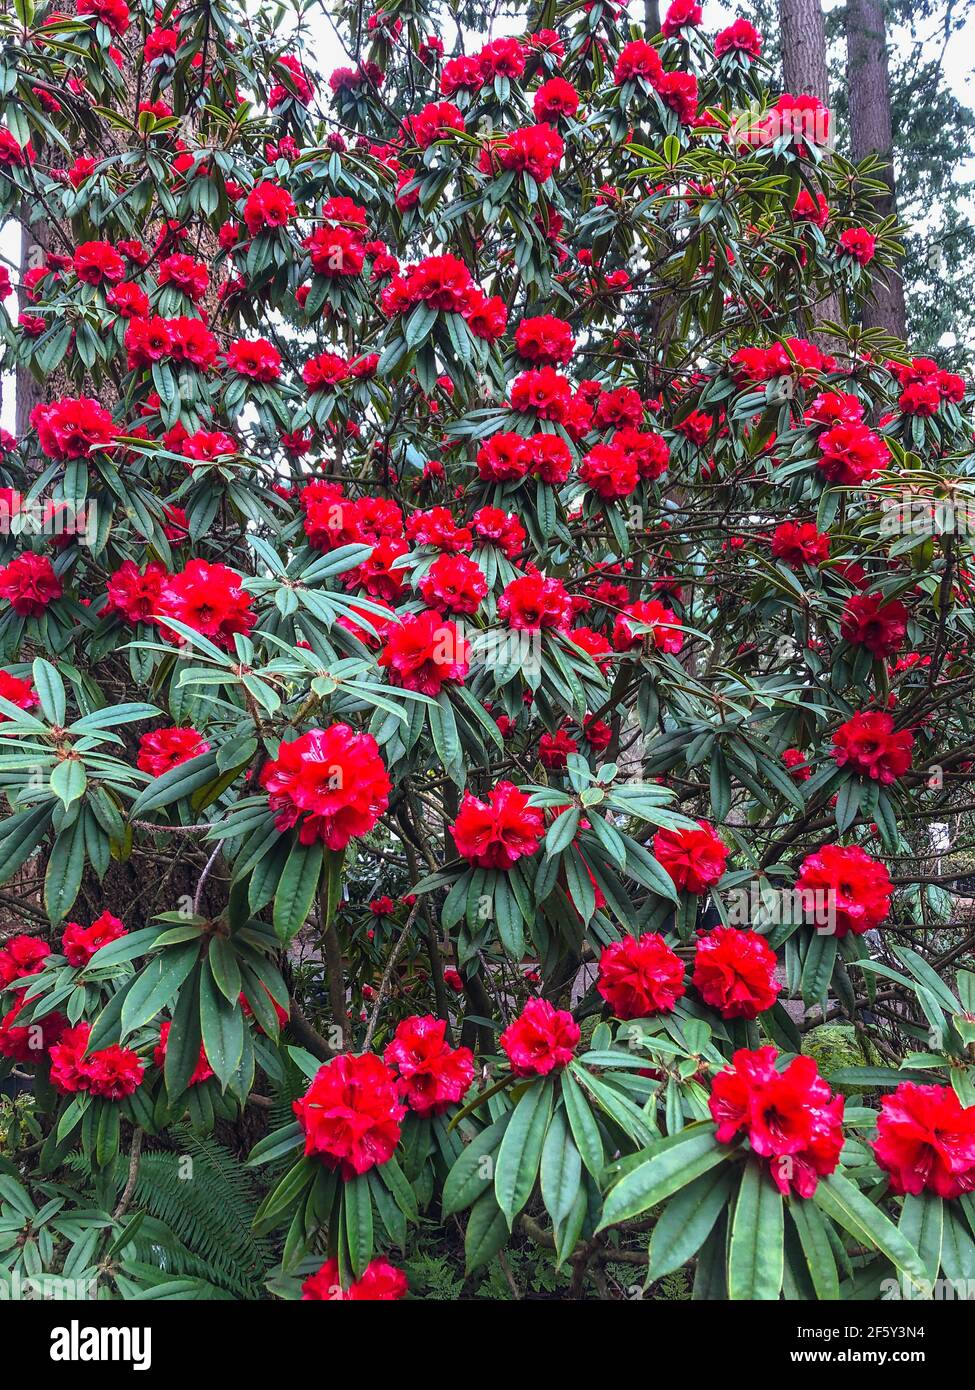 Rhododendron strigillosum is a rhododendron species native to Sichuan and Yunnan in China, where it grows at altitudes of 1600–3800 meters. It is a sh Stock Photo